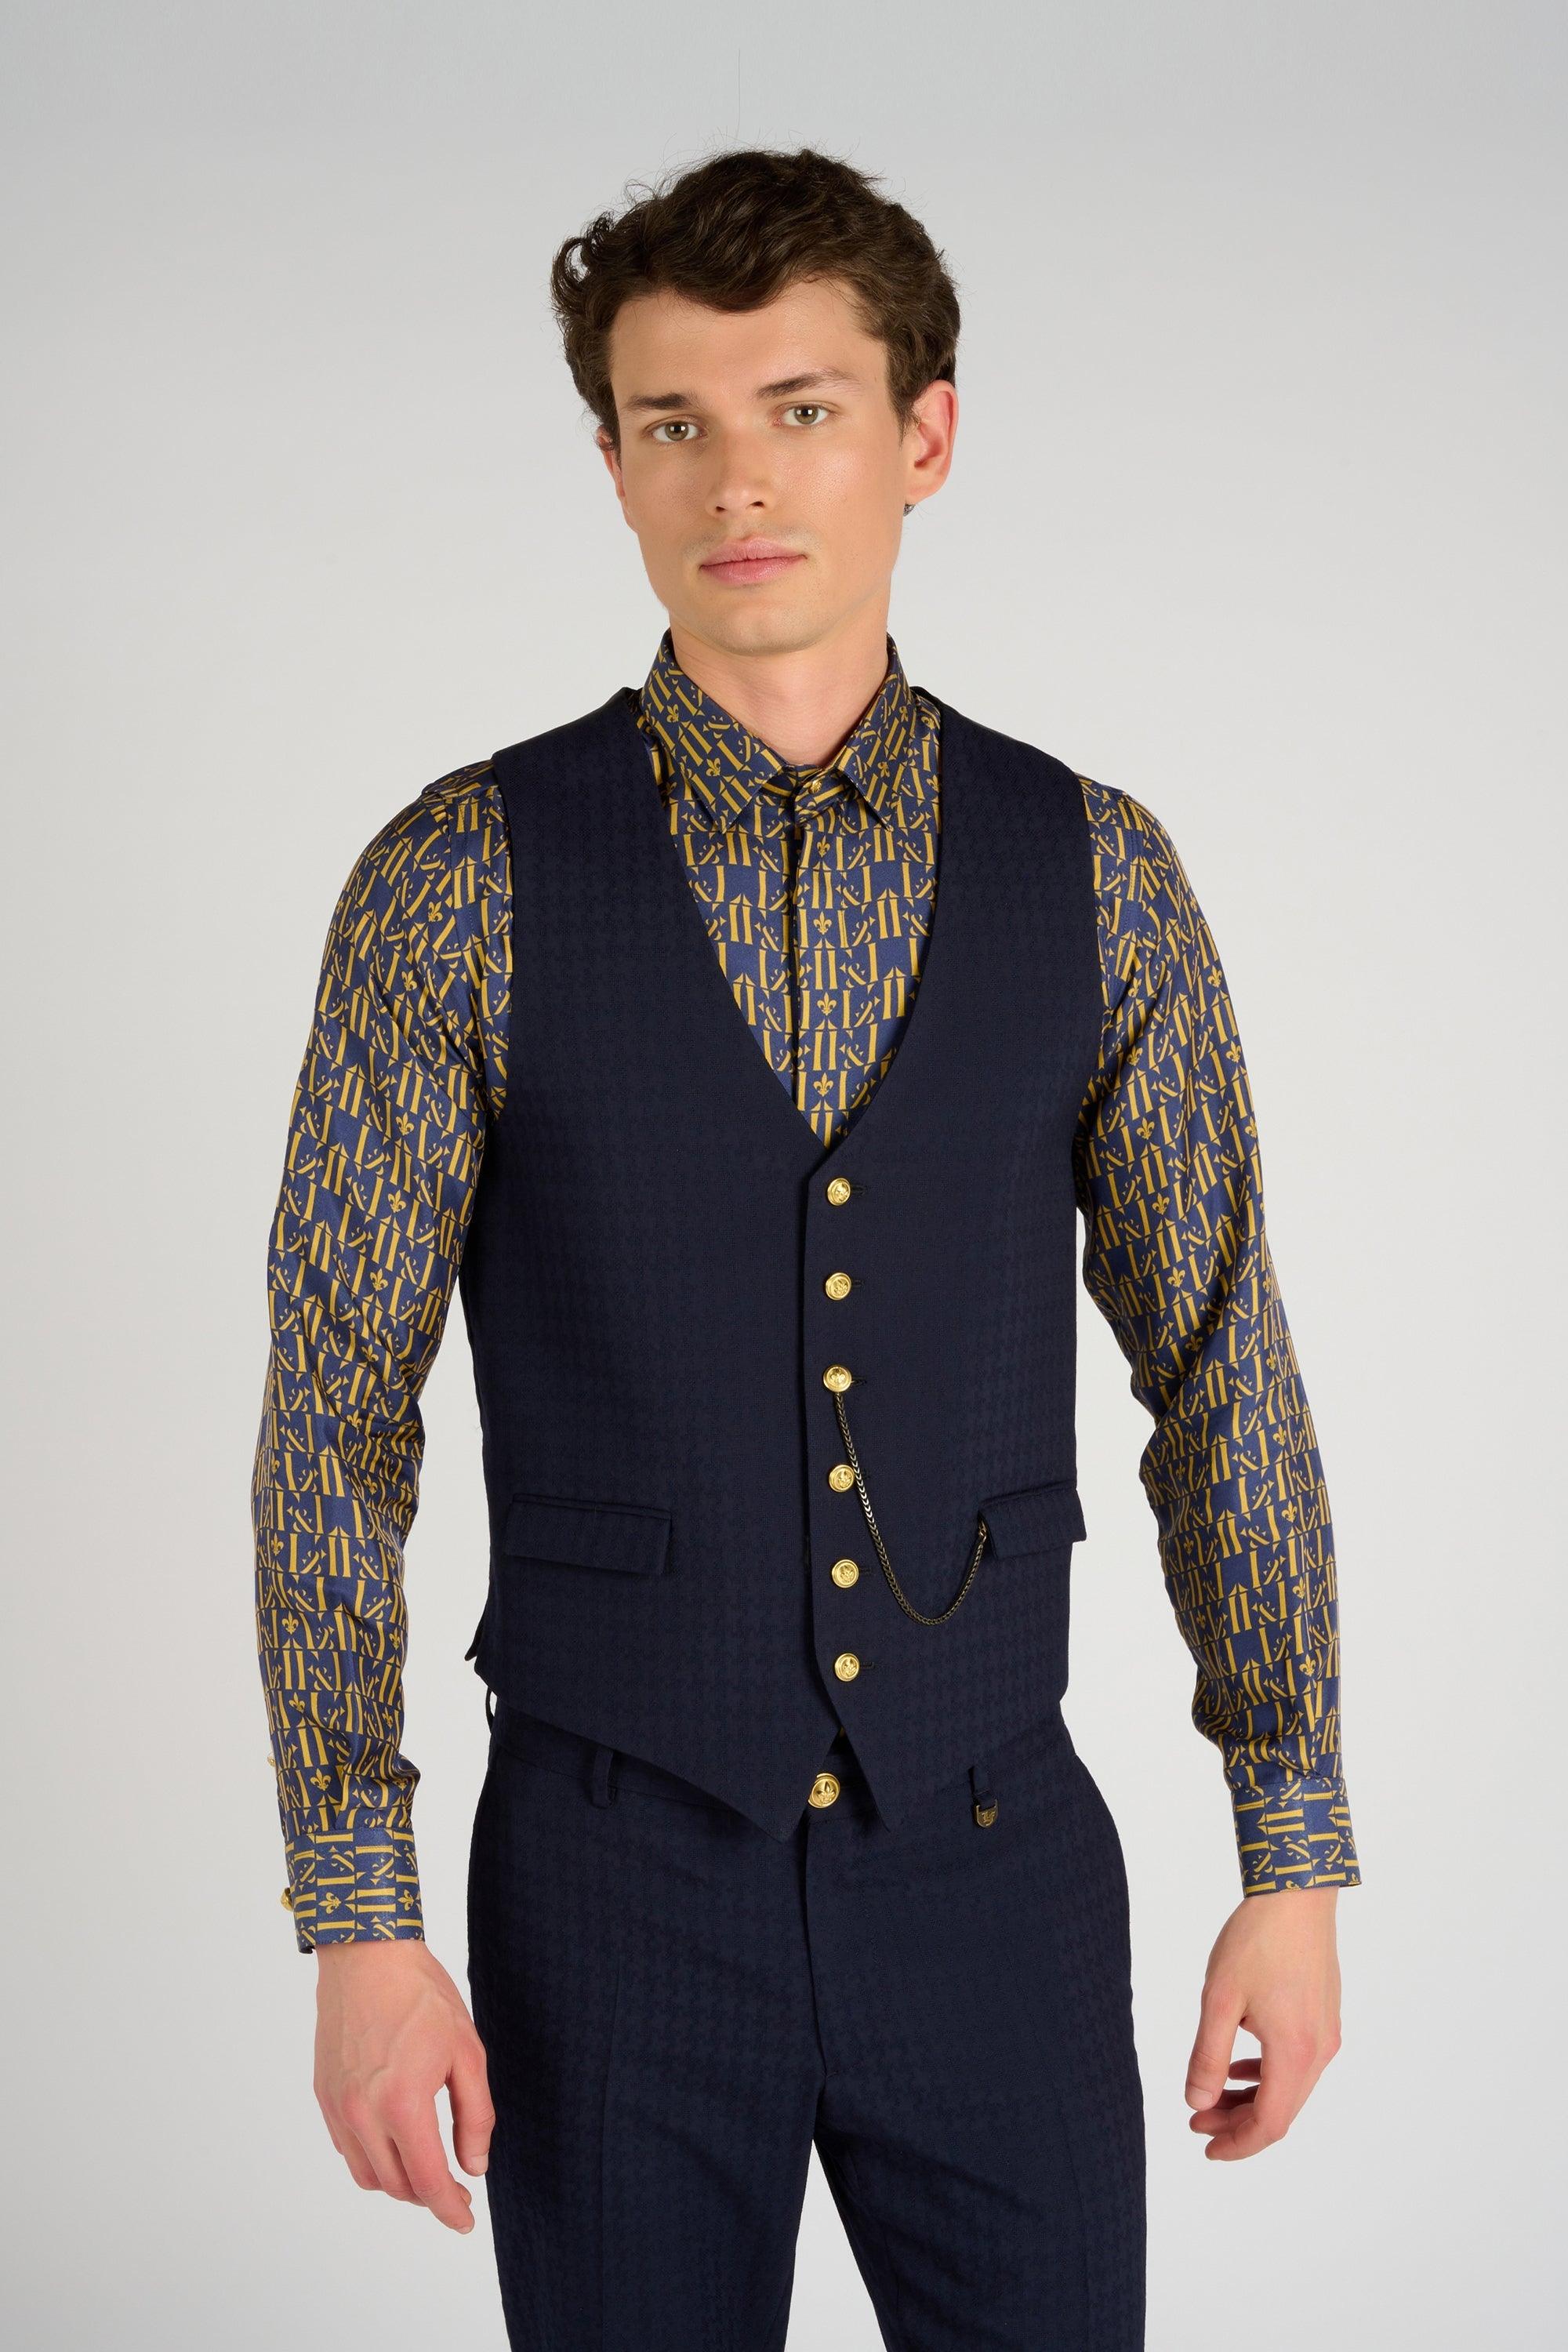 GILET STAR NAVY - Lords & Fools dandy, frenchstyle, menfashion, paris, parisianstyle, S24, suit, SUMMER 2024, tailoring